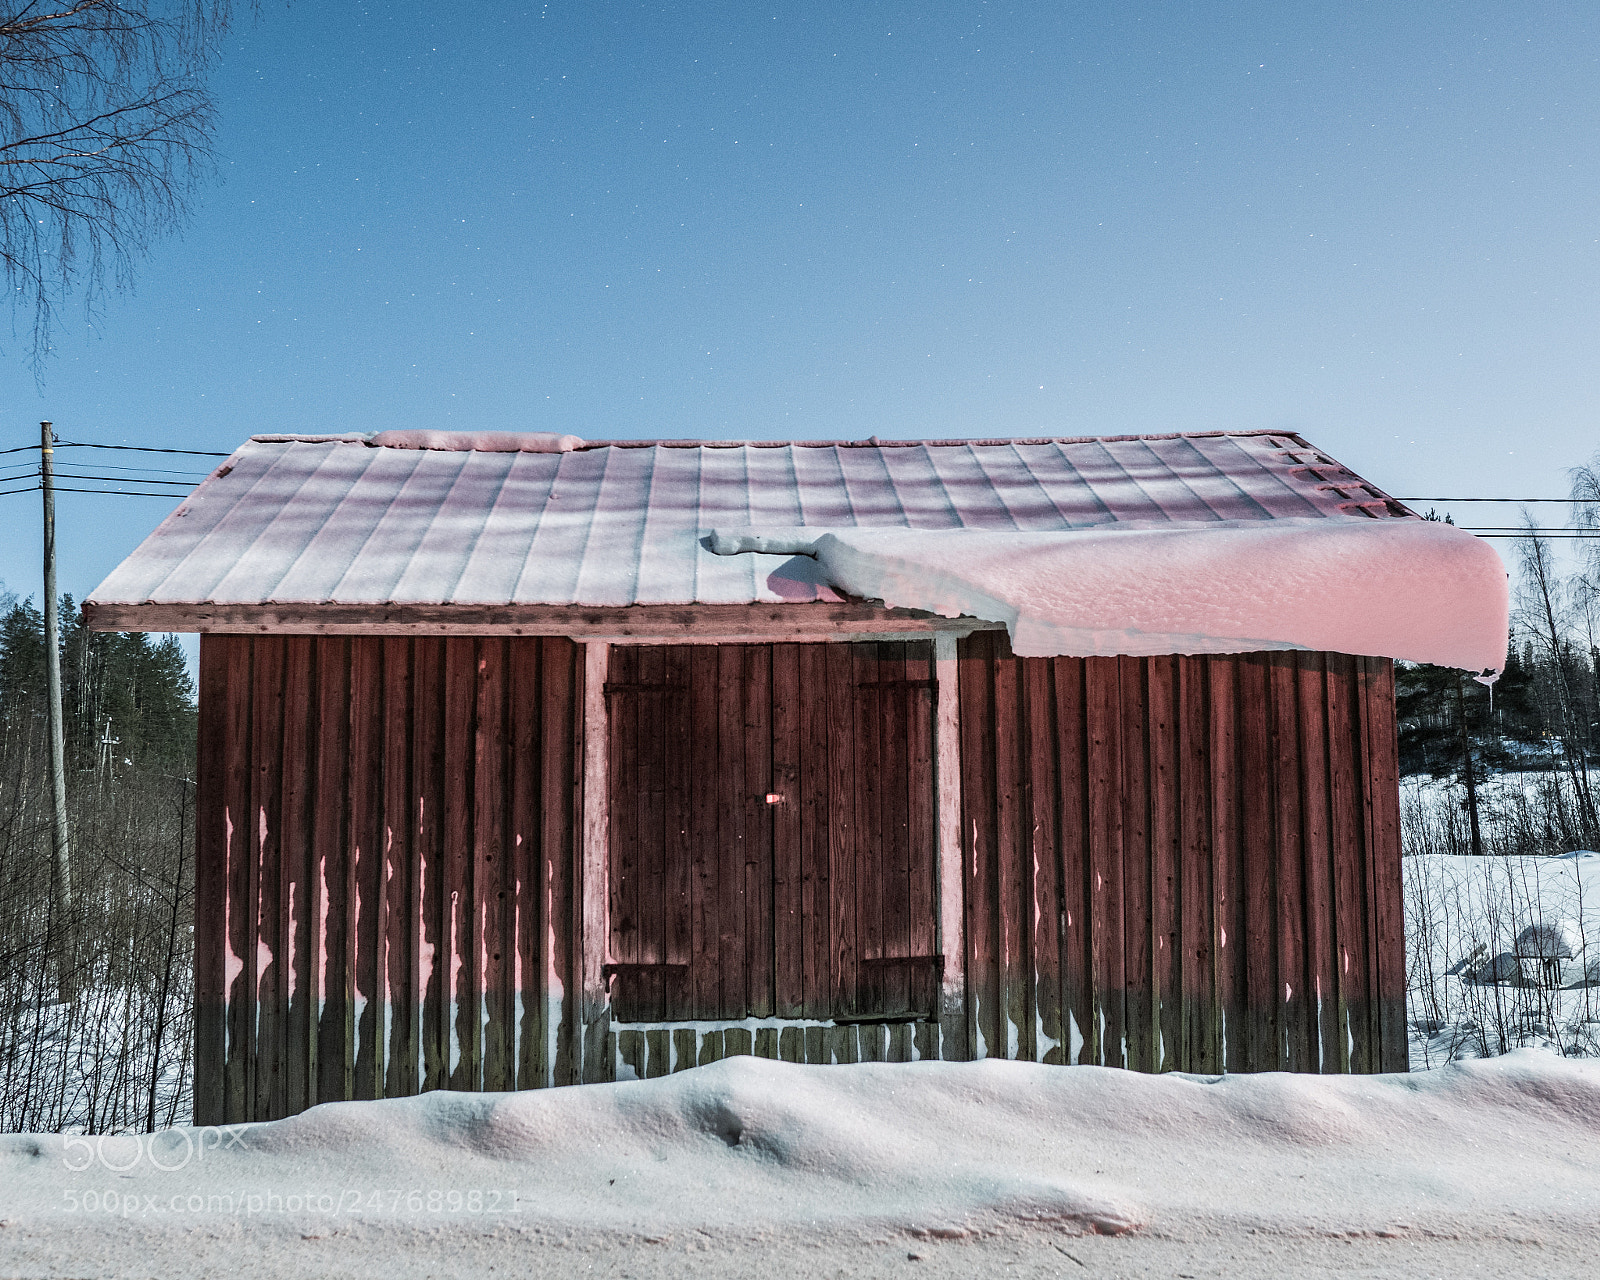 Sony a6500 sample photo. Shed in finnish countryside photography